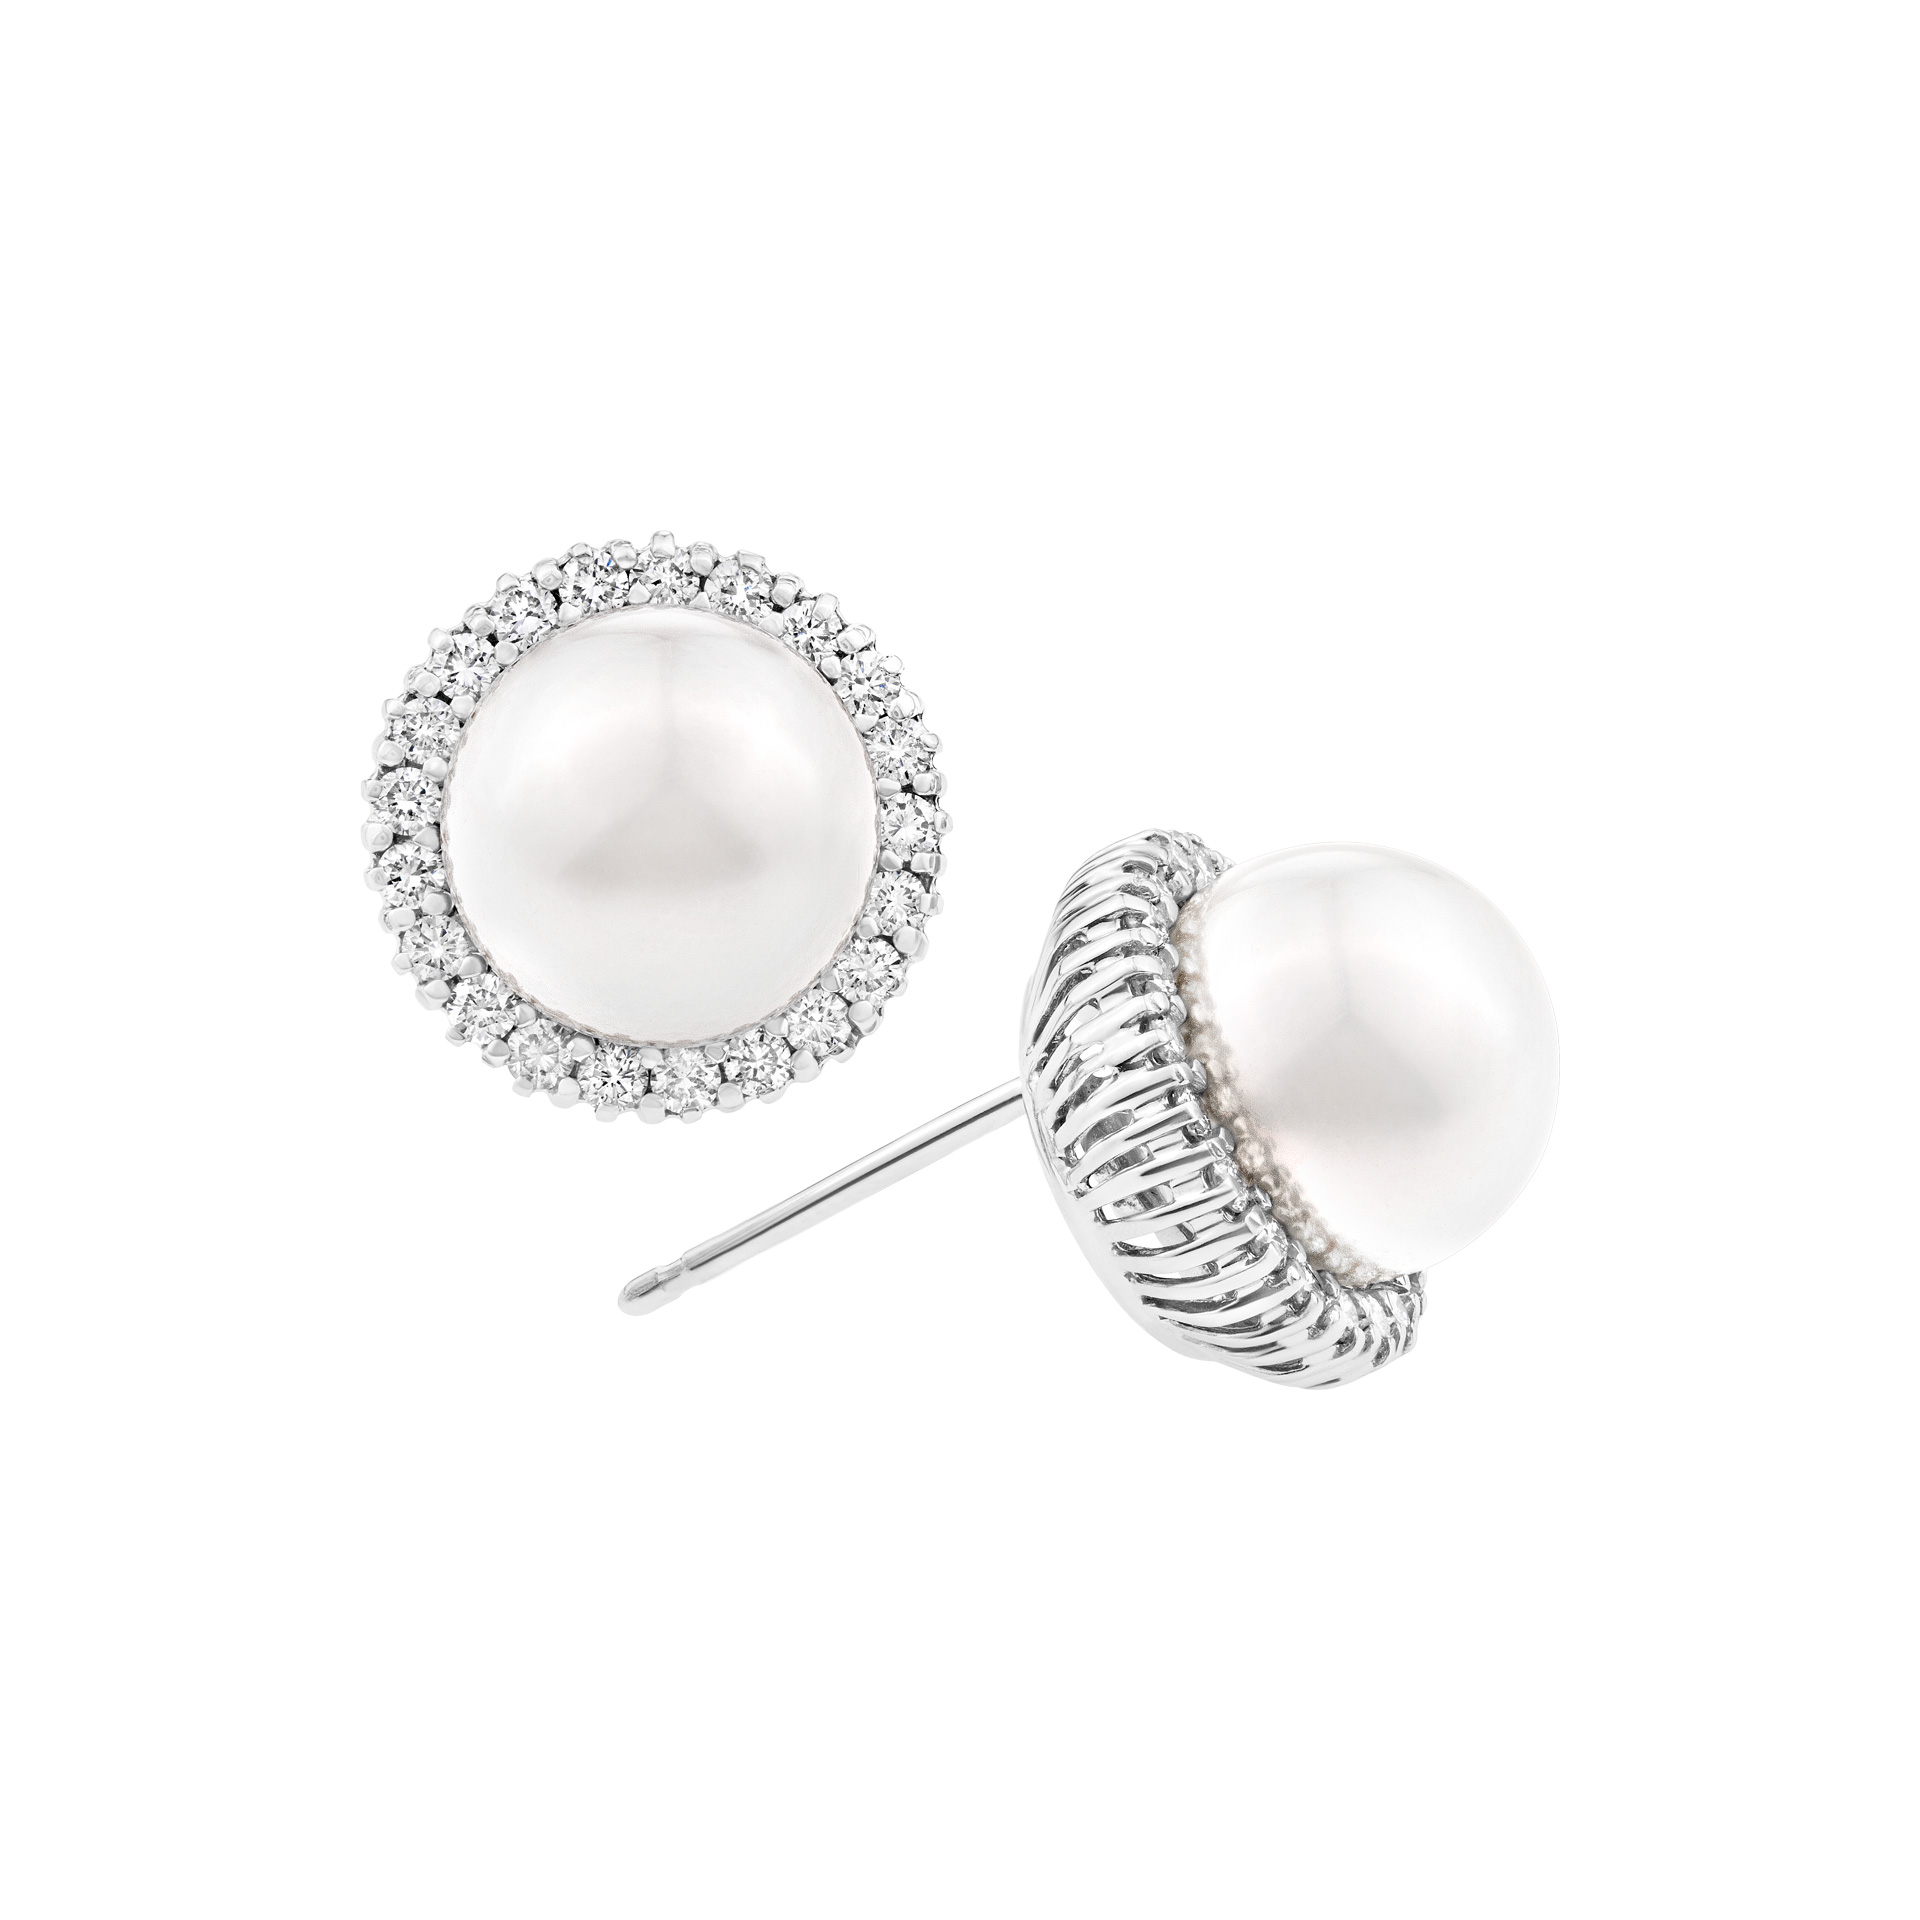 Pearl earrings with diamonds on 18K white gold